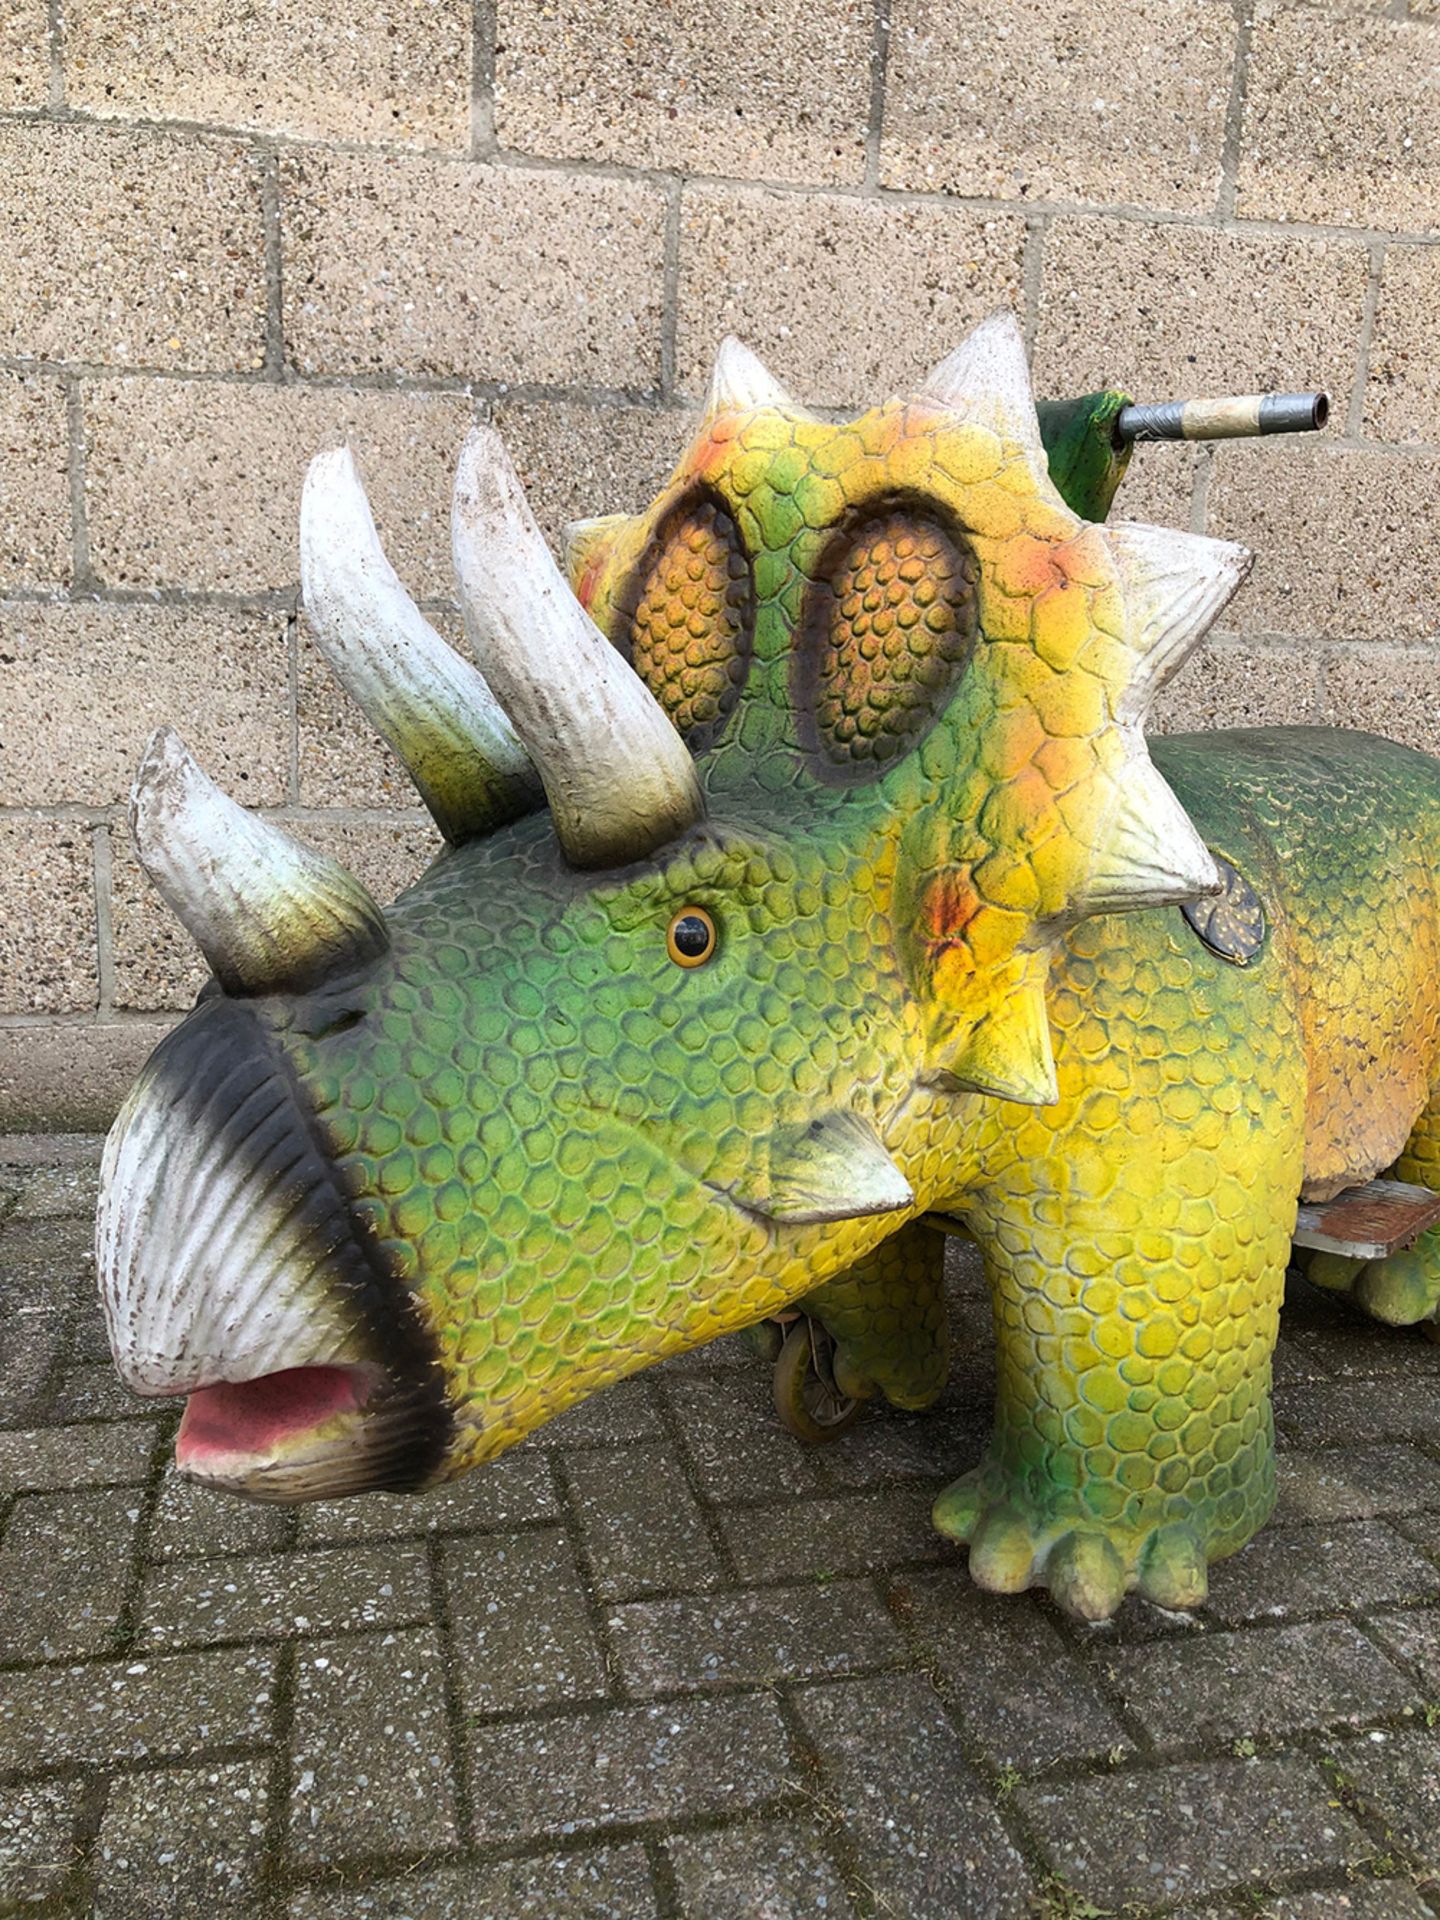 Children's Fairground Coin-Op Triceratops Attraction - Image 8 of 10